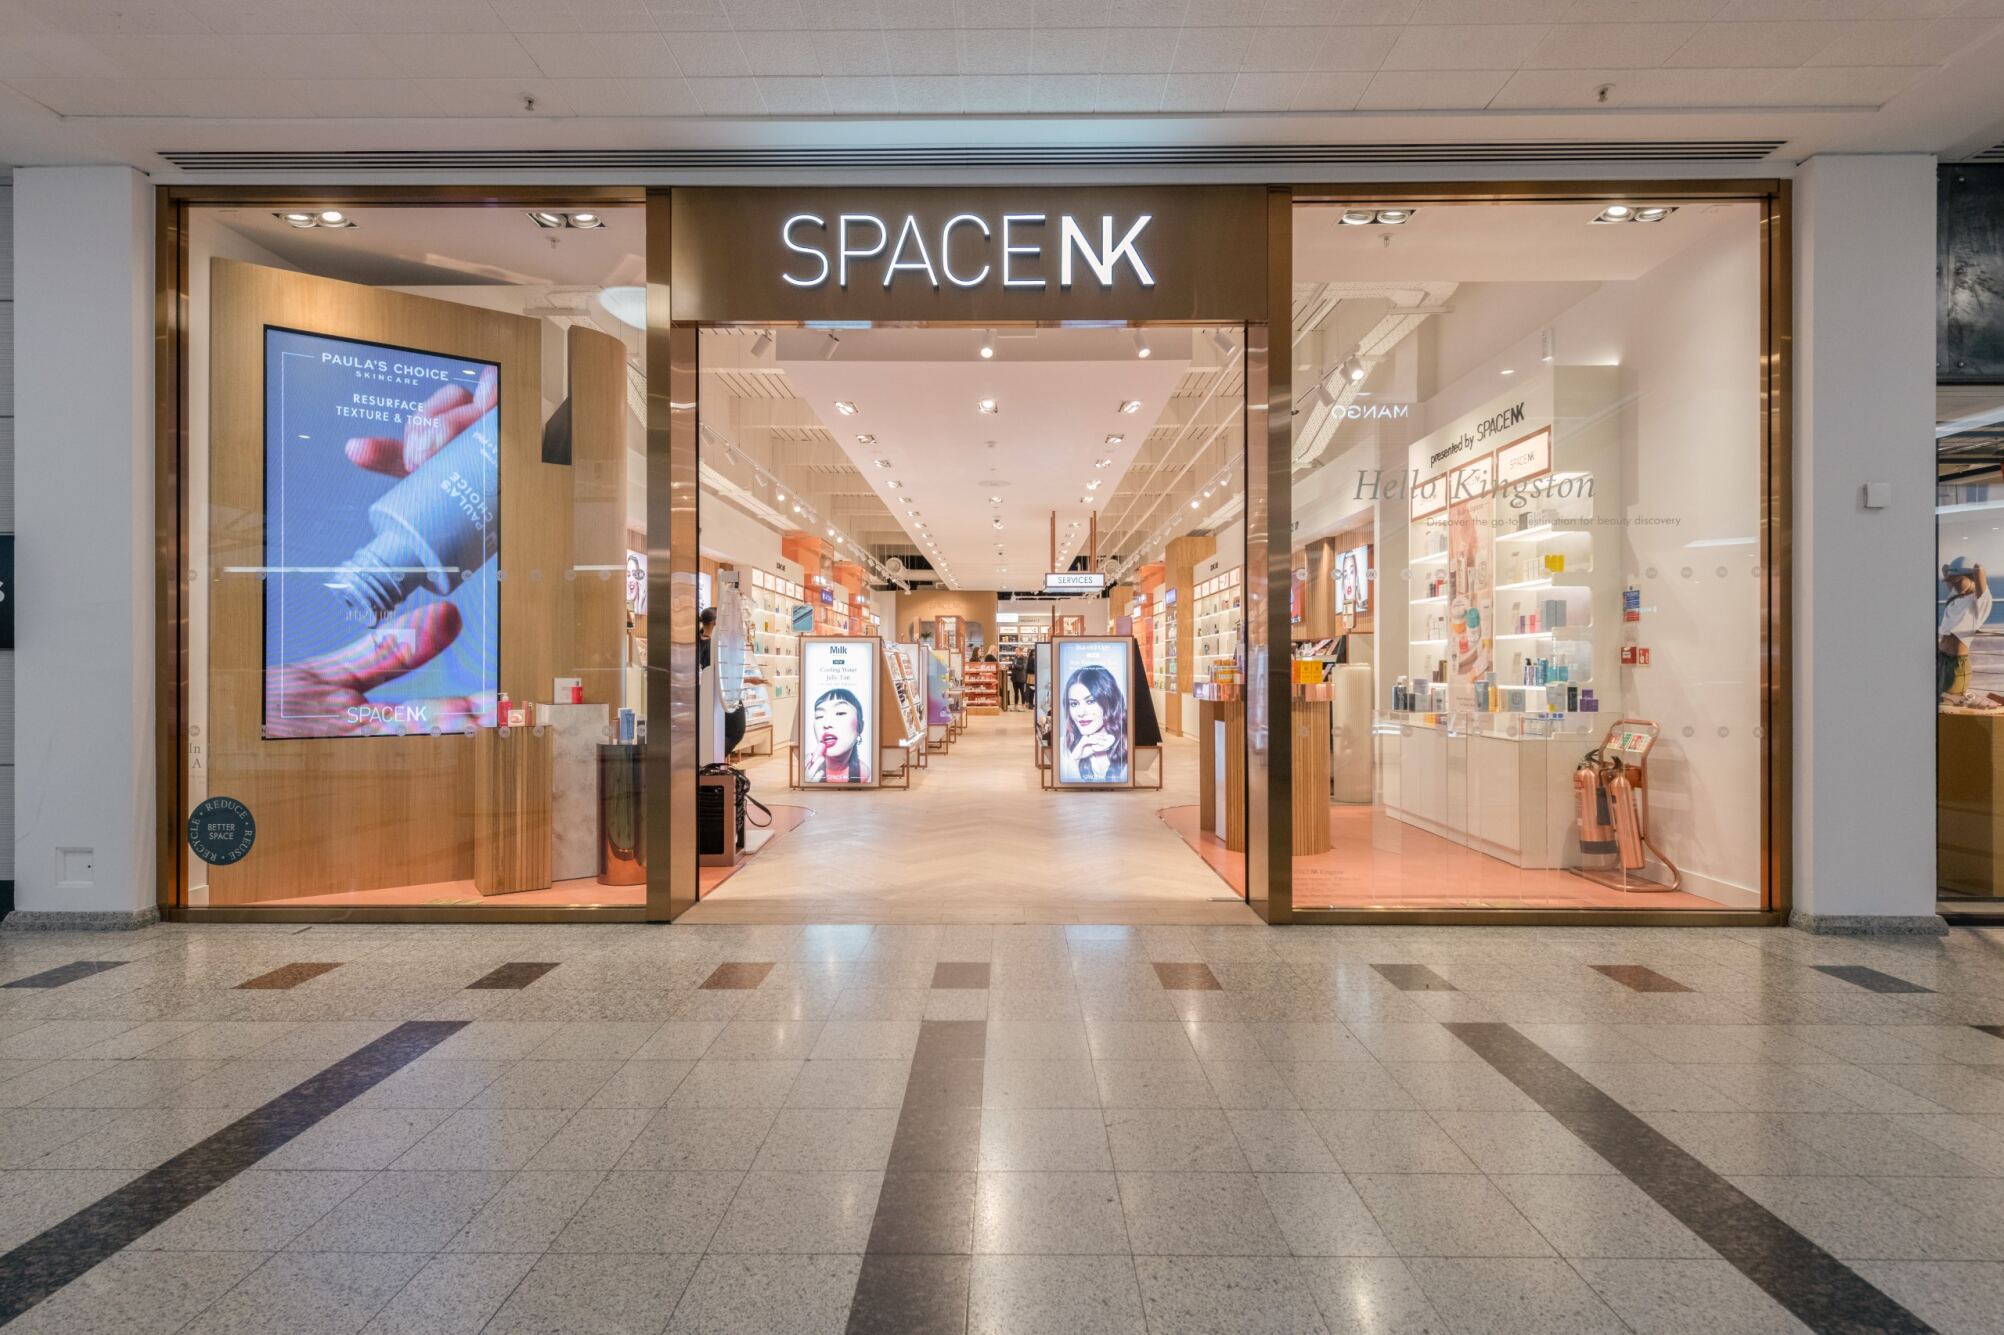 Space NK announces a second Manchester store location, with a new flagship store planned at Trafford Centre